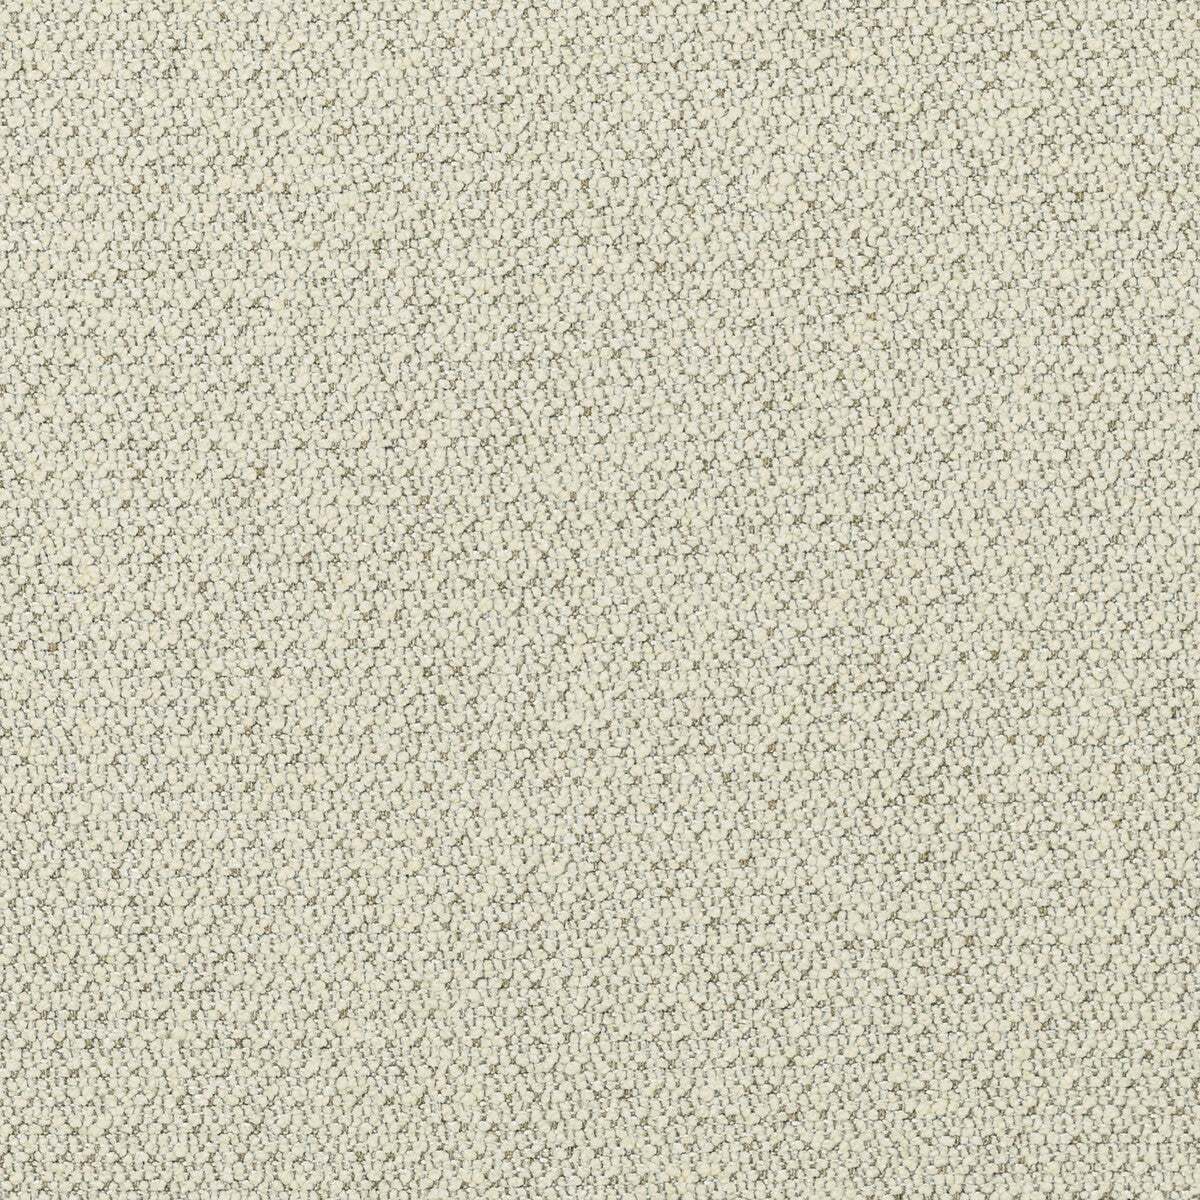 Bali Boucle fabric in sand color - pattern 36051.116.0 - by Kravet Couture in the Luxury Textures II collection